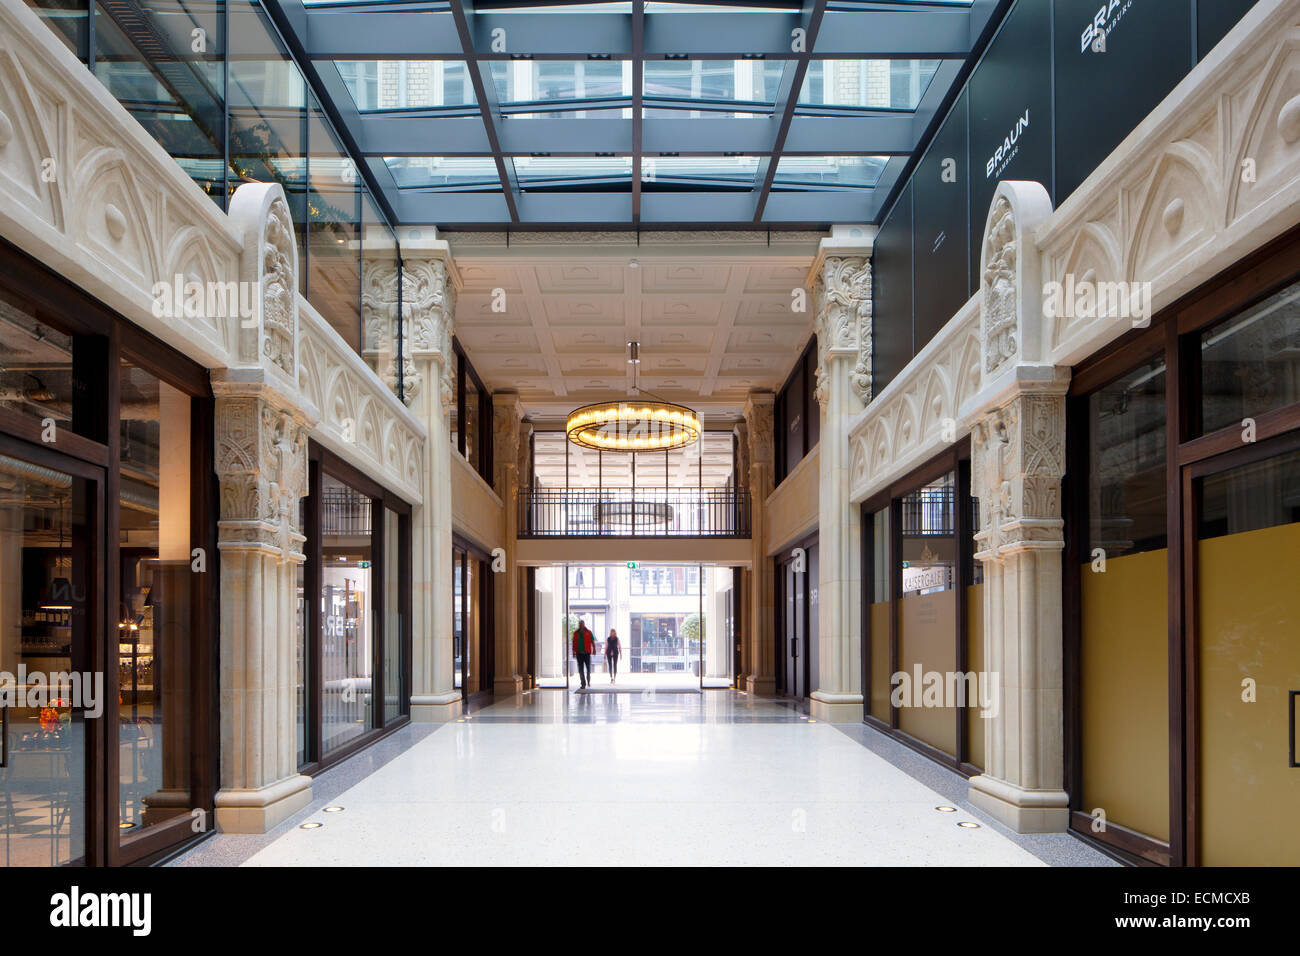 Kaisergalerie mall, high-end shops, atrium with terrazzo floor, renovated coffered ceiling and 7.50 meter high sandstone pillars Stock Photo